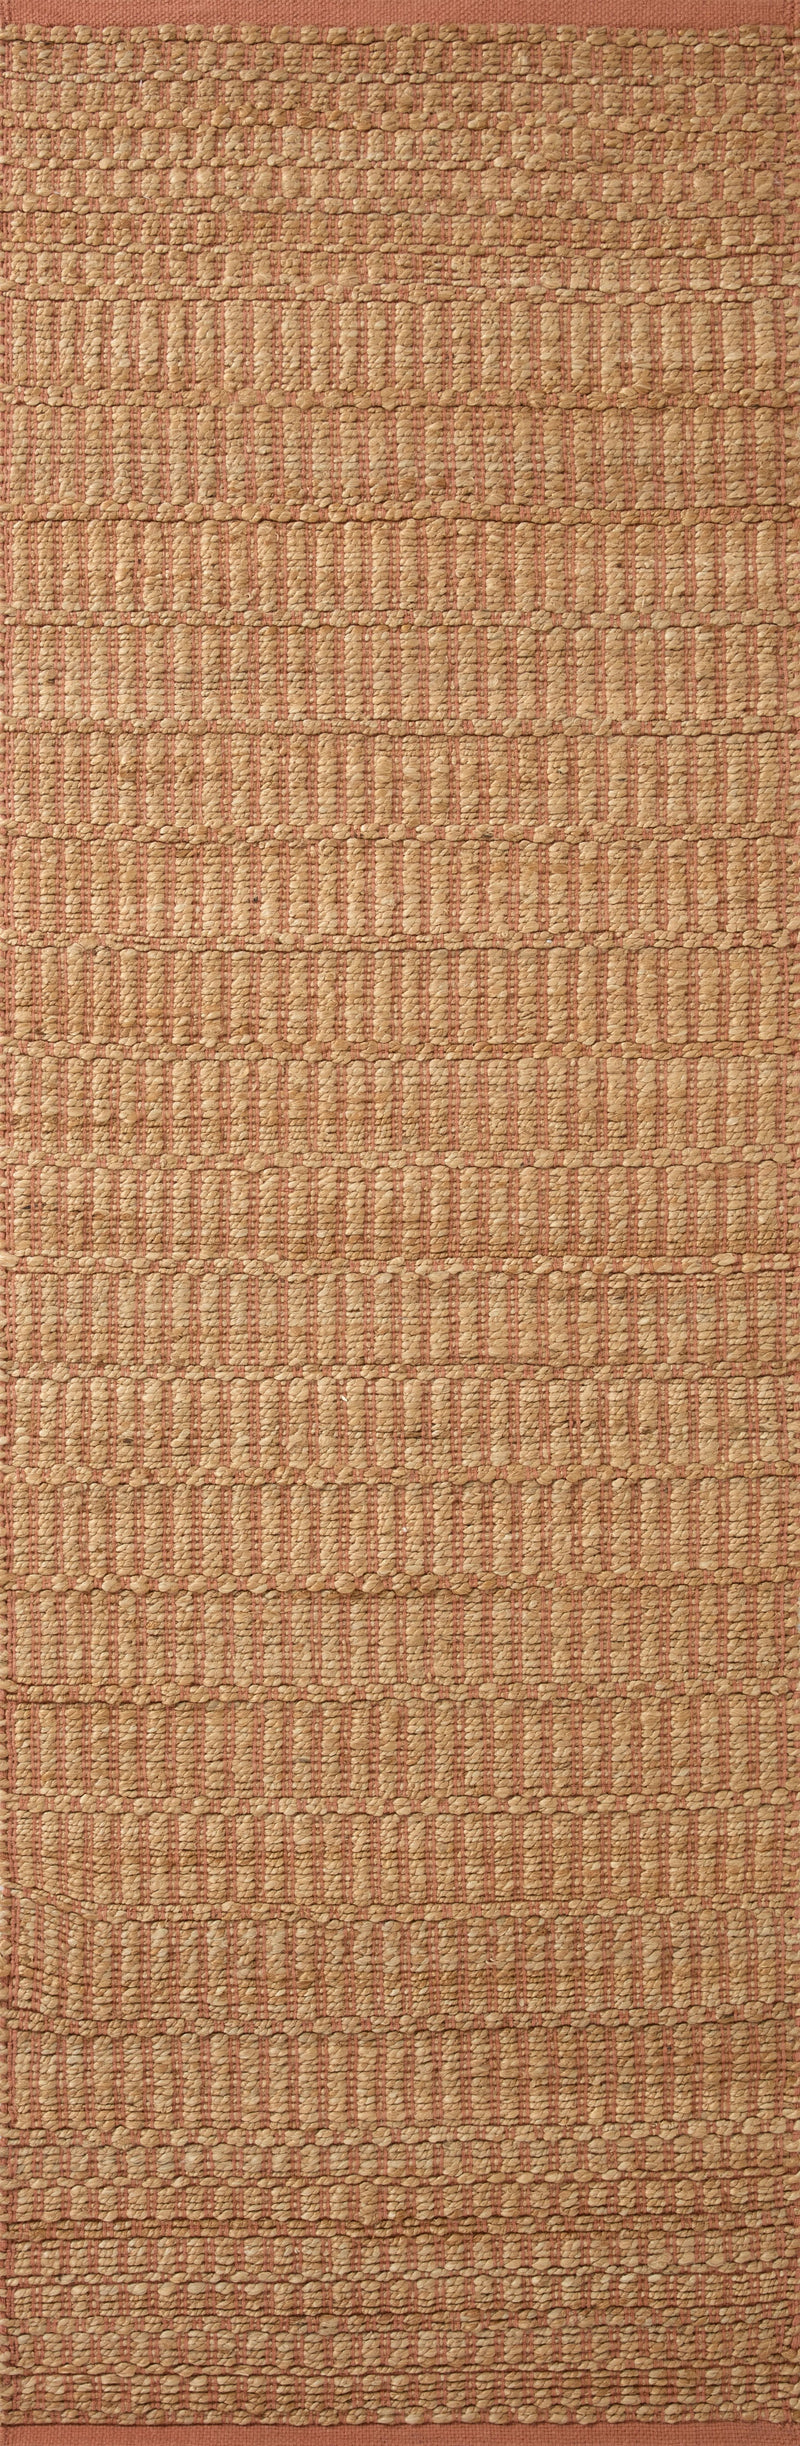 media image for colton hand woven natural clay rug by angela rose x loloi colocon 05nacg2030 2 21